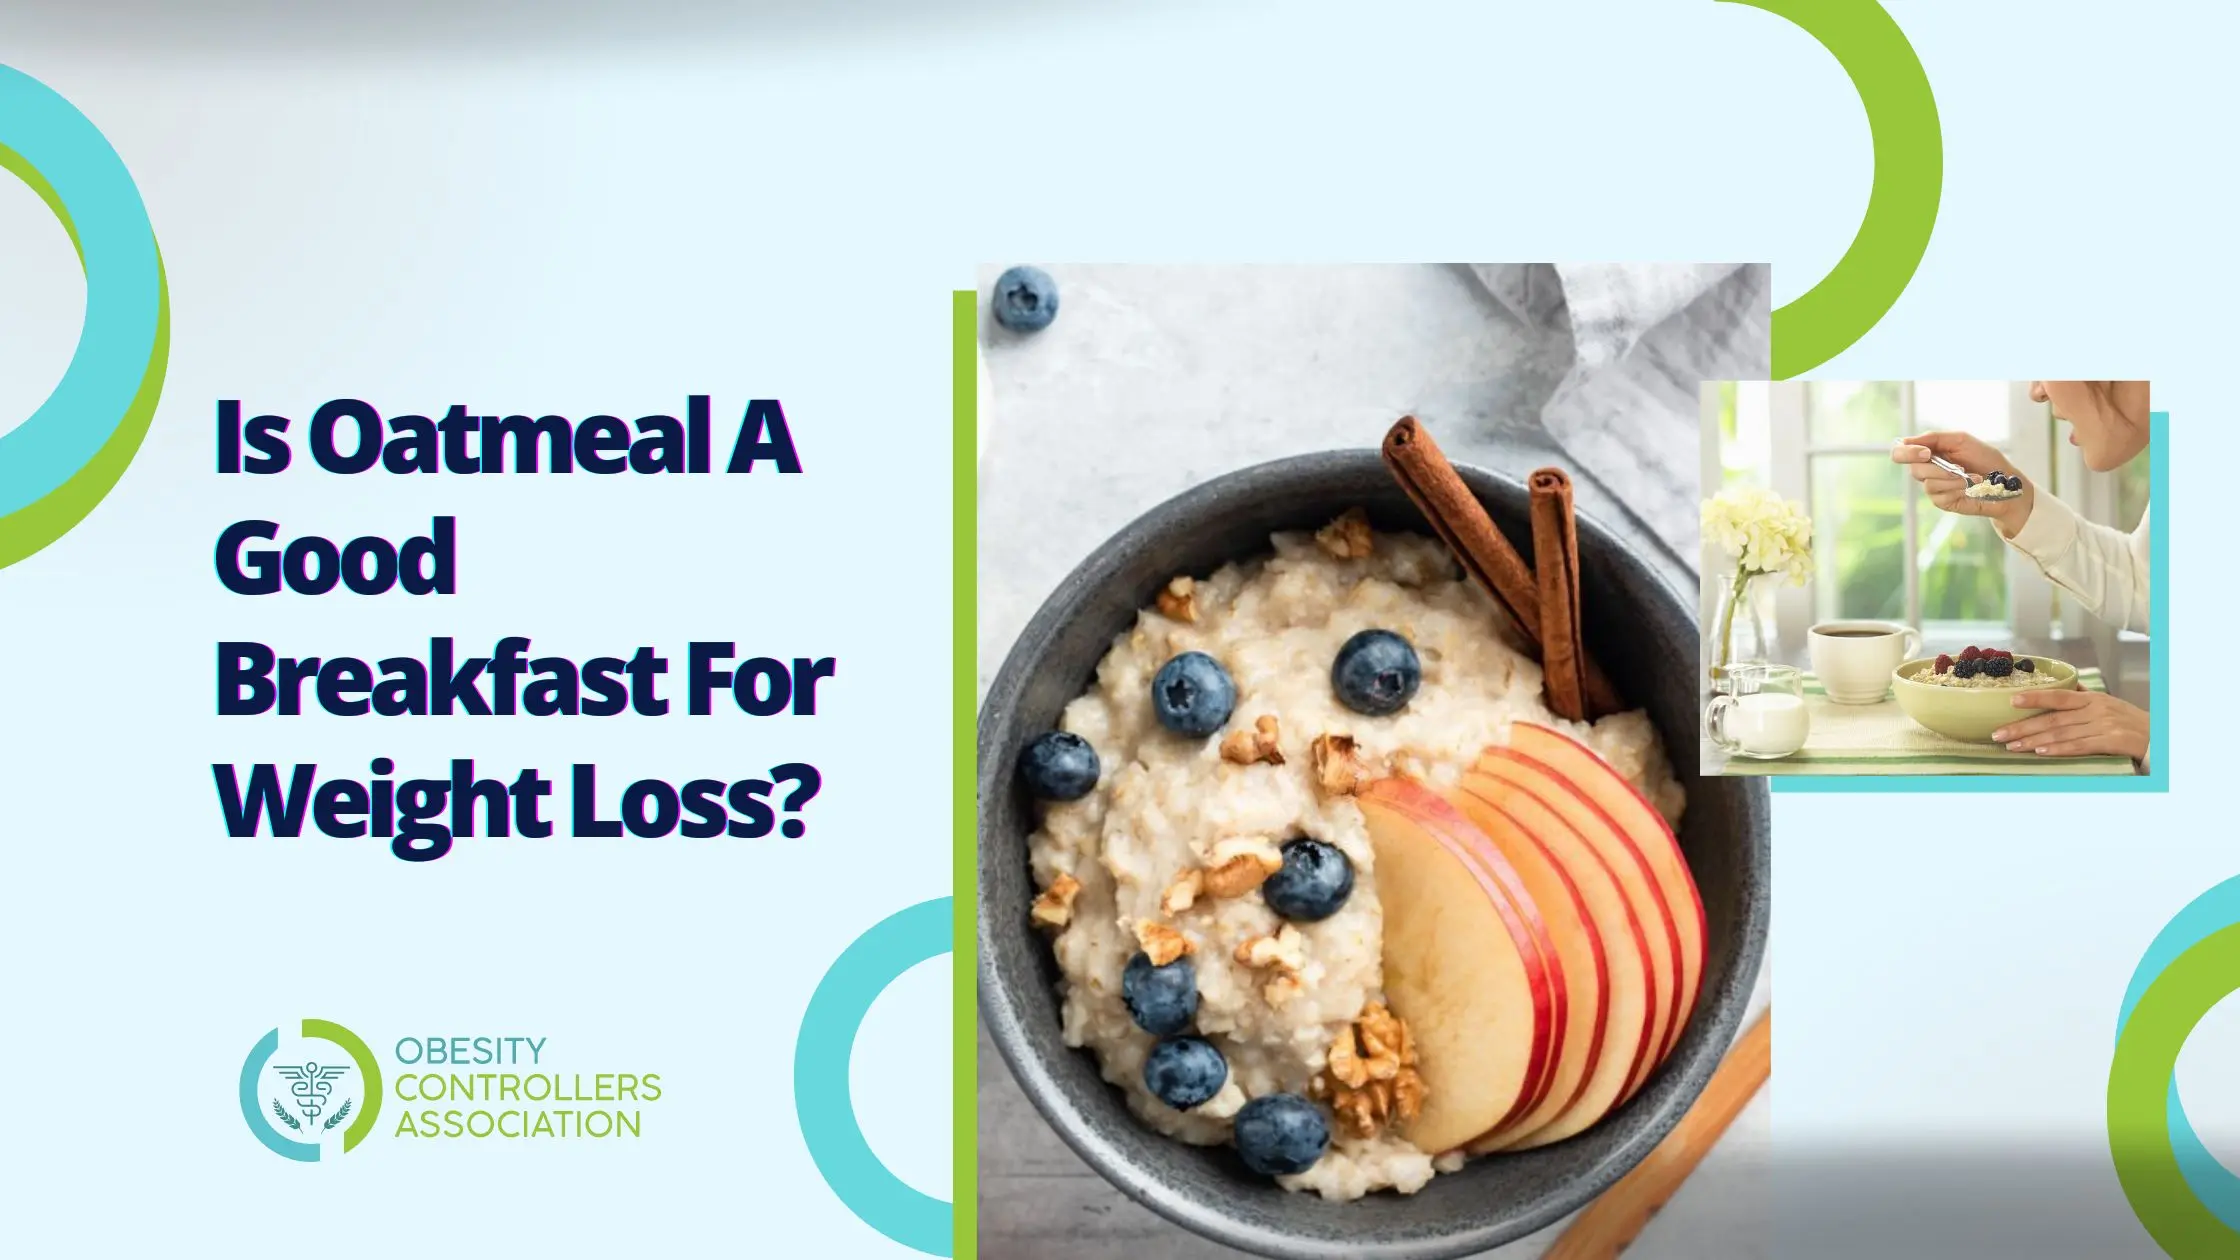 Oatmeal As A Good Breakfast For Weight Loss